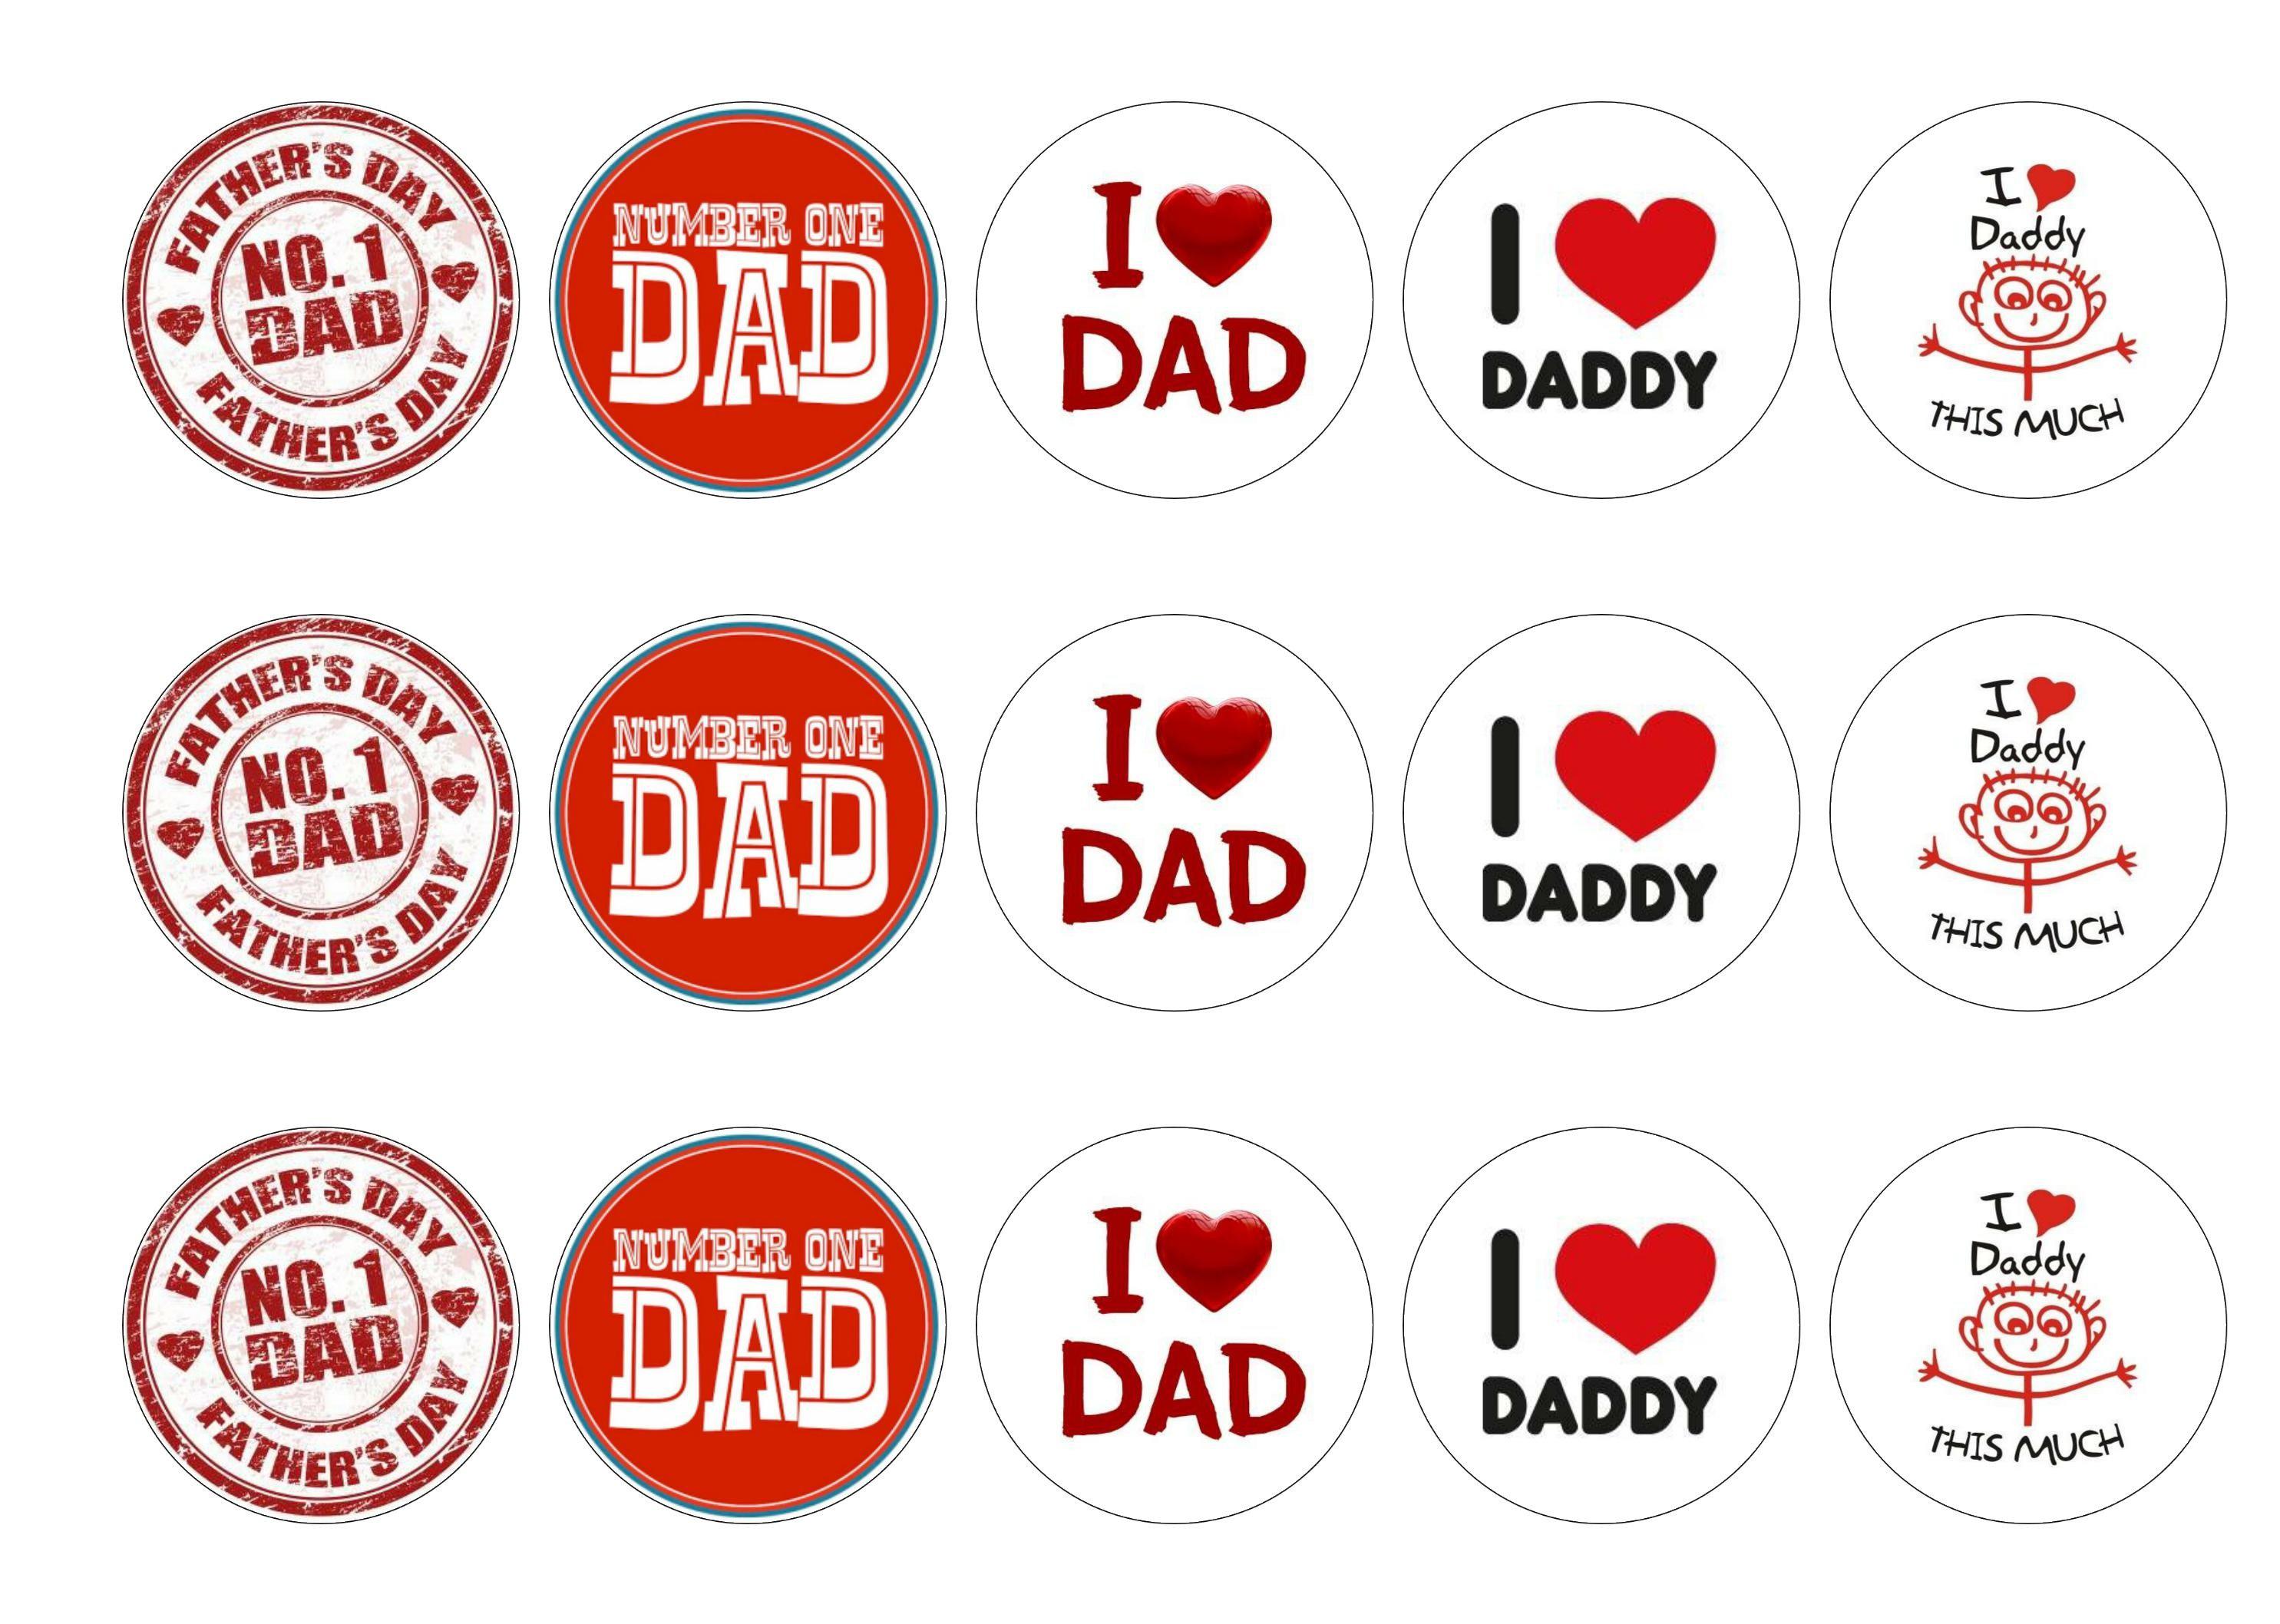 Edible printed cupcake toppers for Father's Day in shades of red